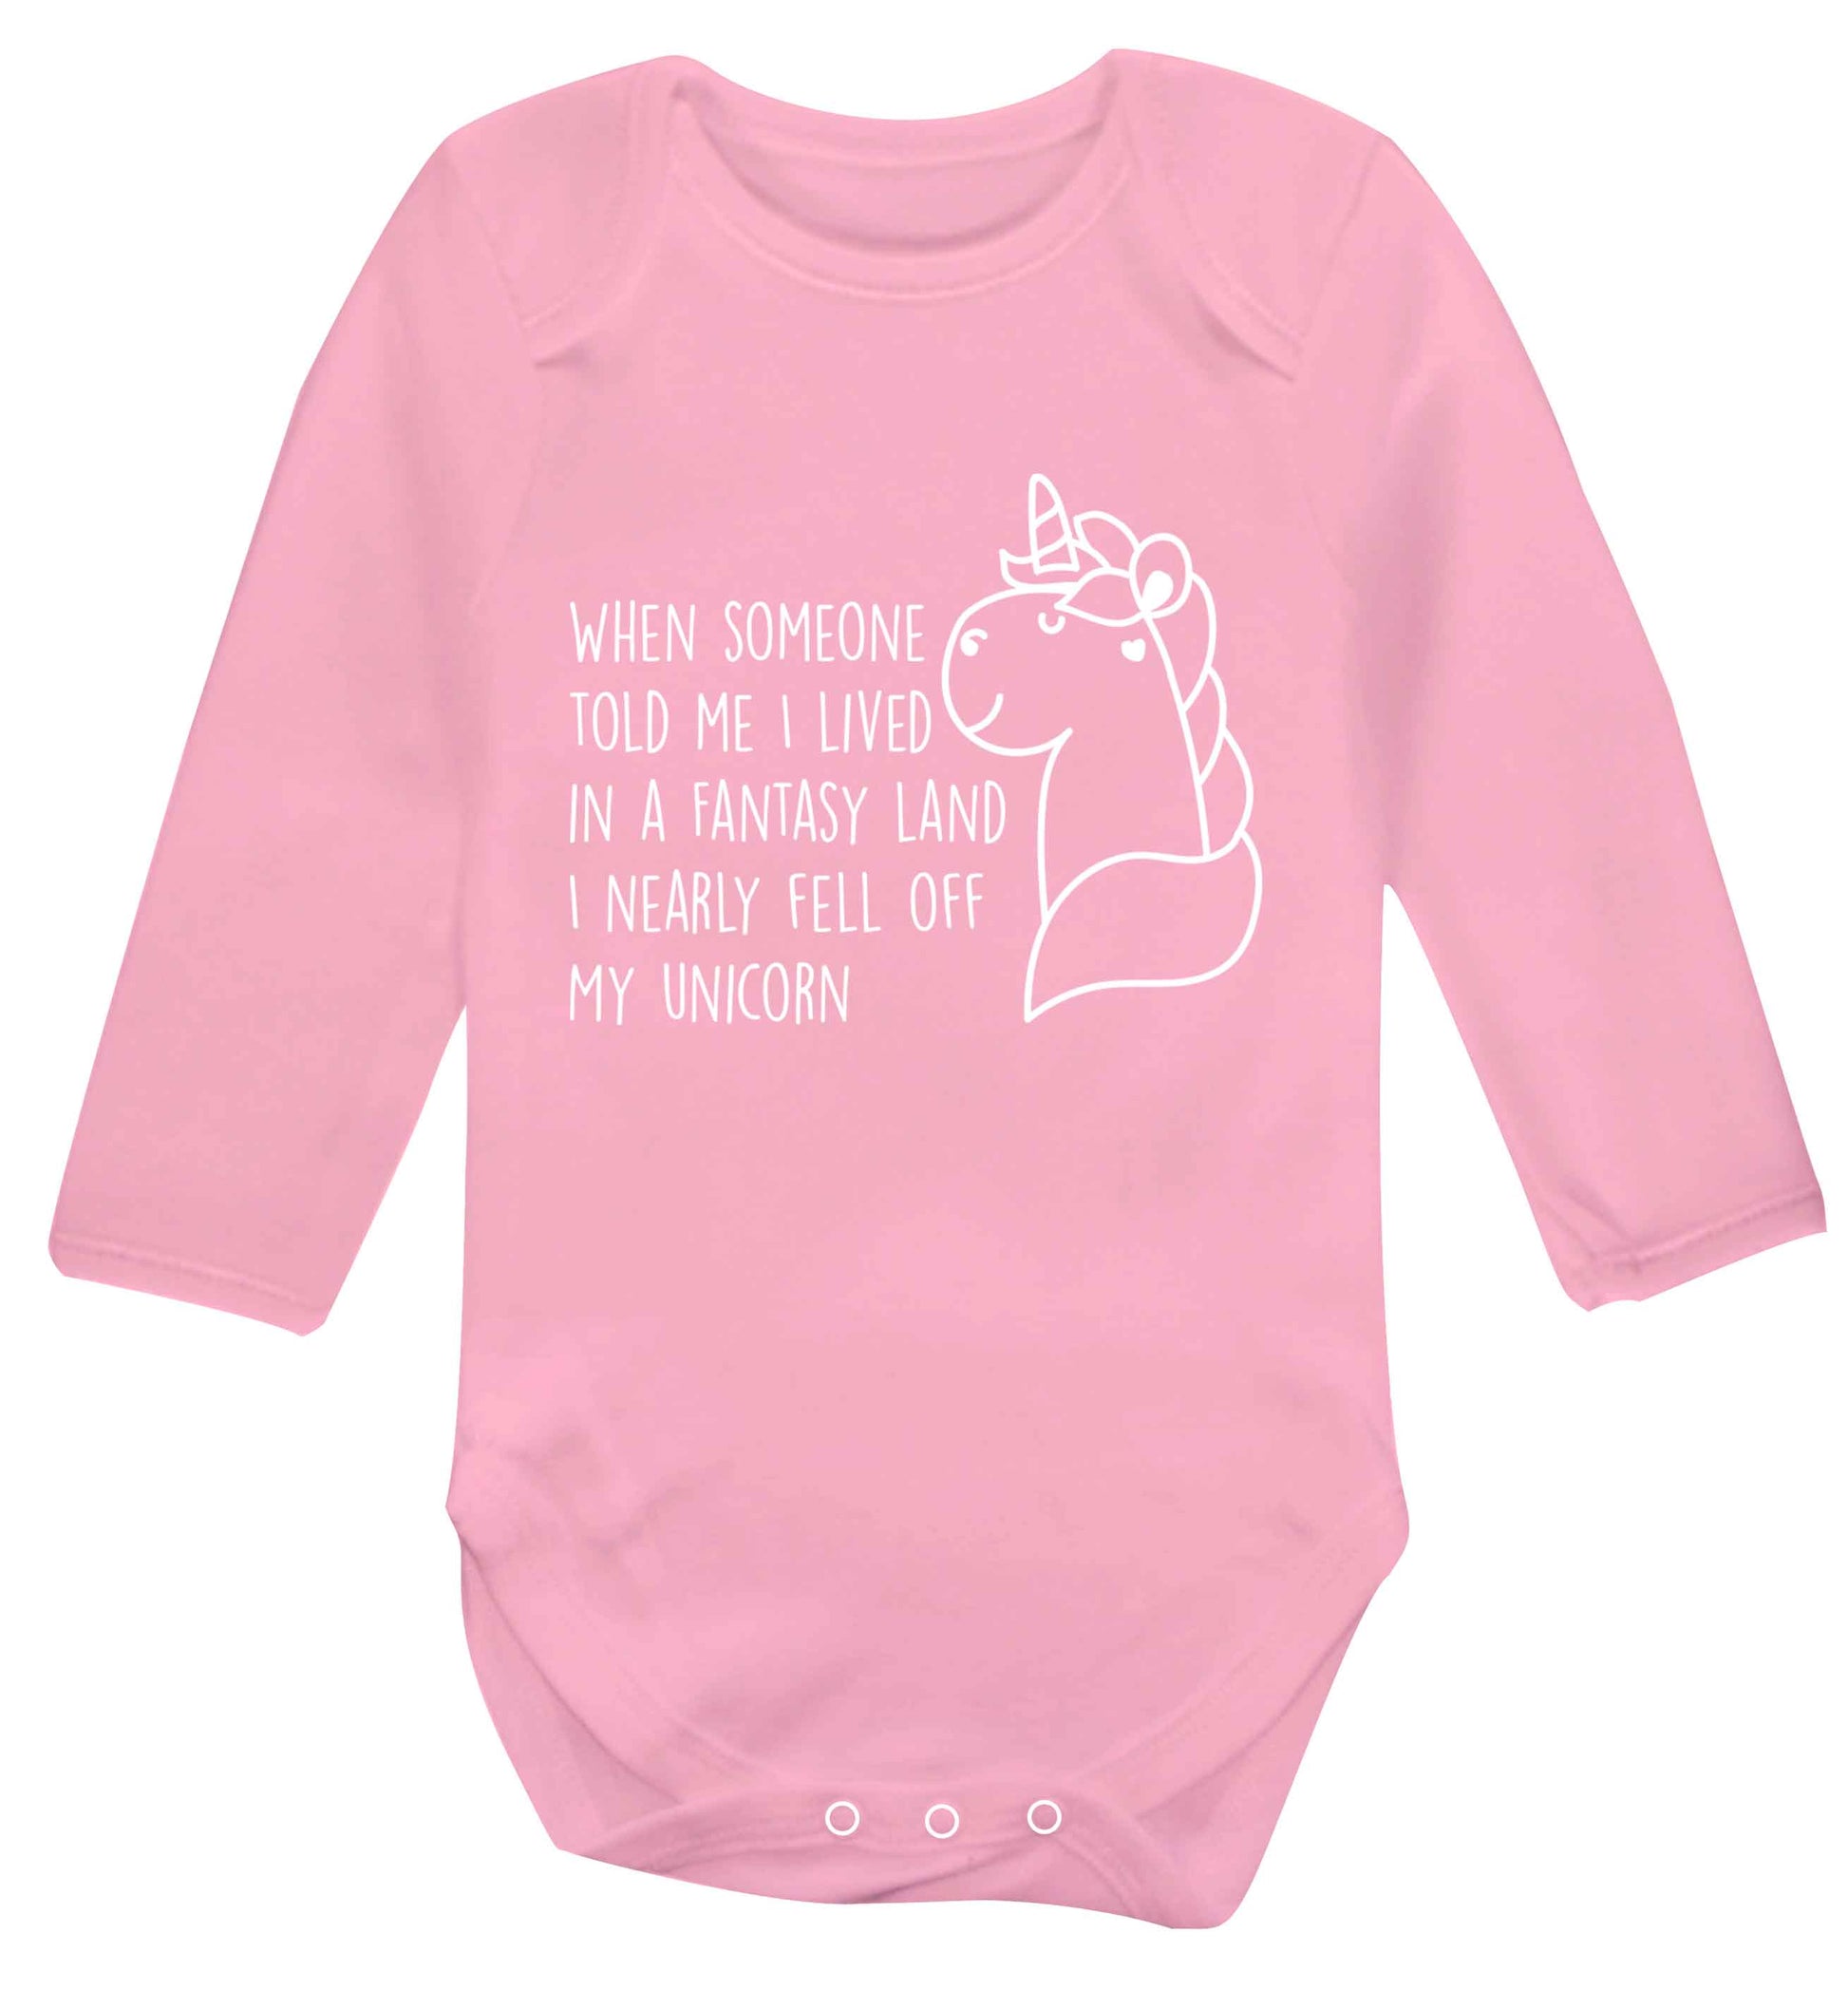 When somebody told me I lived in a fantasy land I nearly fell of my unicorn Baby Vest long sleeved pale pink 6-12 months